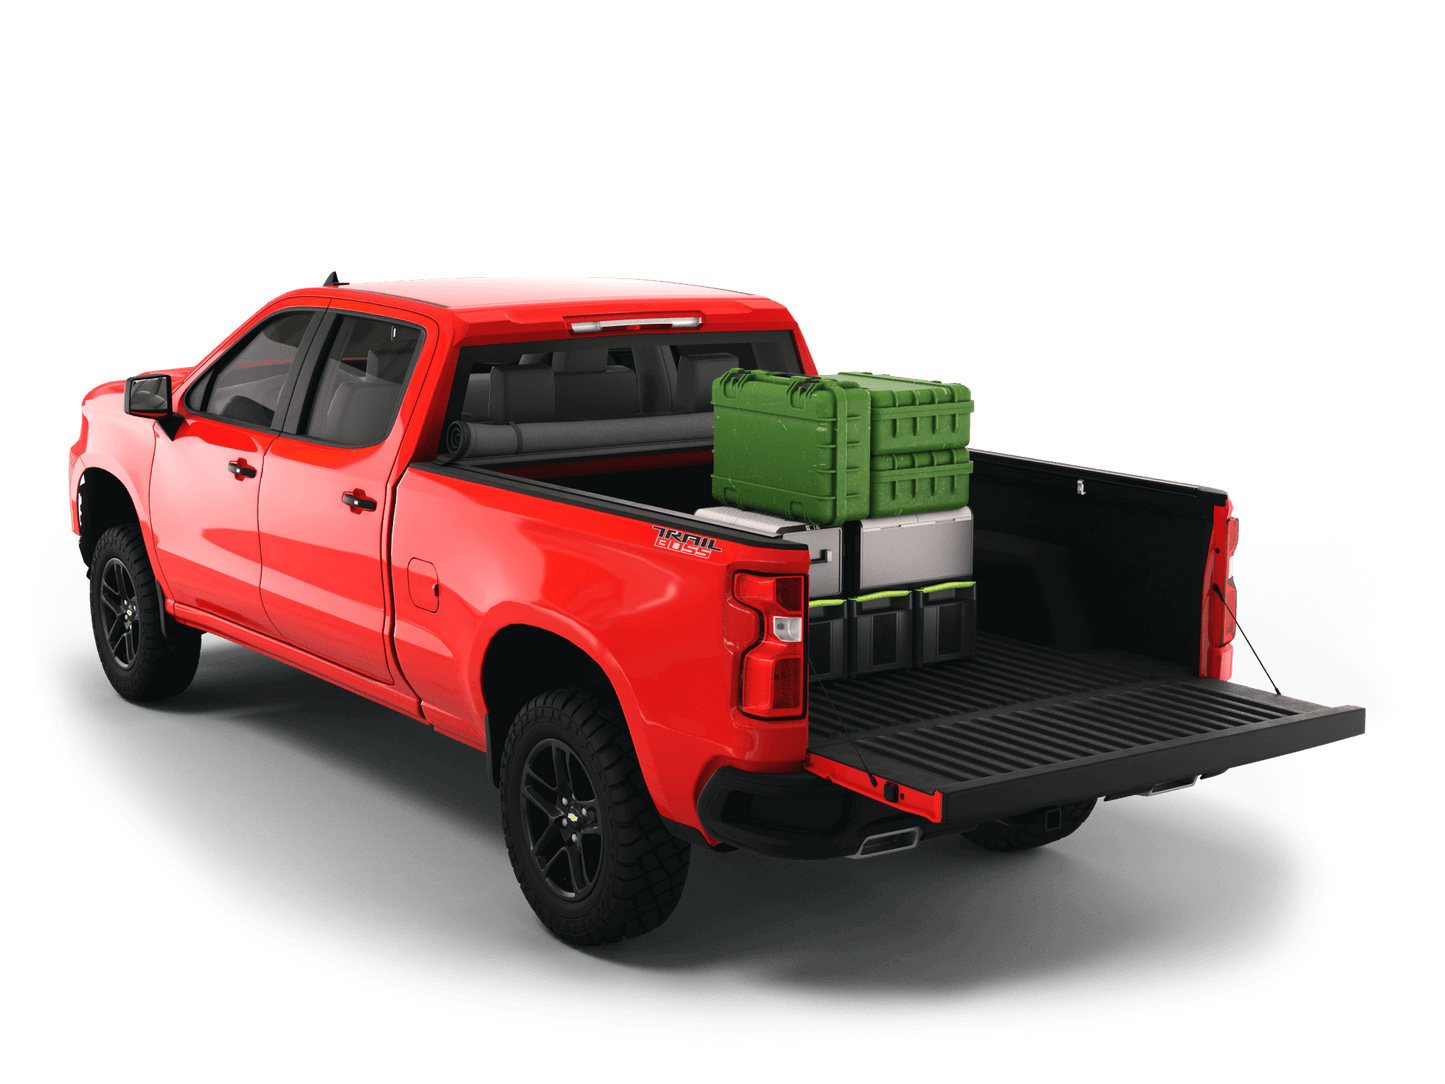 Red Chevrolet Silverado 2500HD / 3500 HD / GMC Sierra 2500HD / 3500HD with gear in the truck bed and the Sawtooth Stretch tonneau cover rolled up at cab 